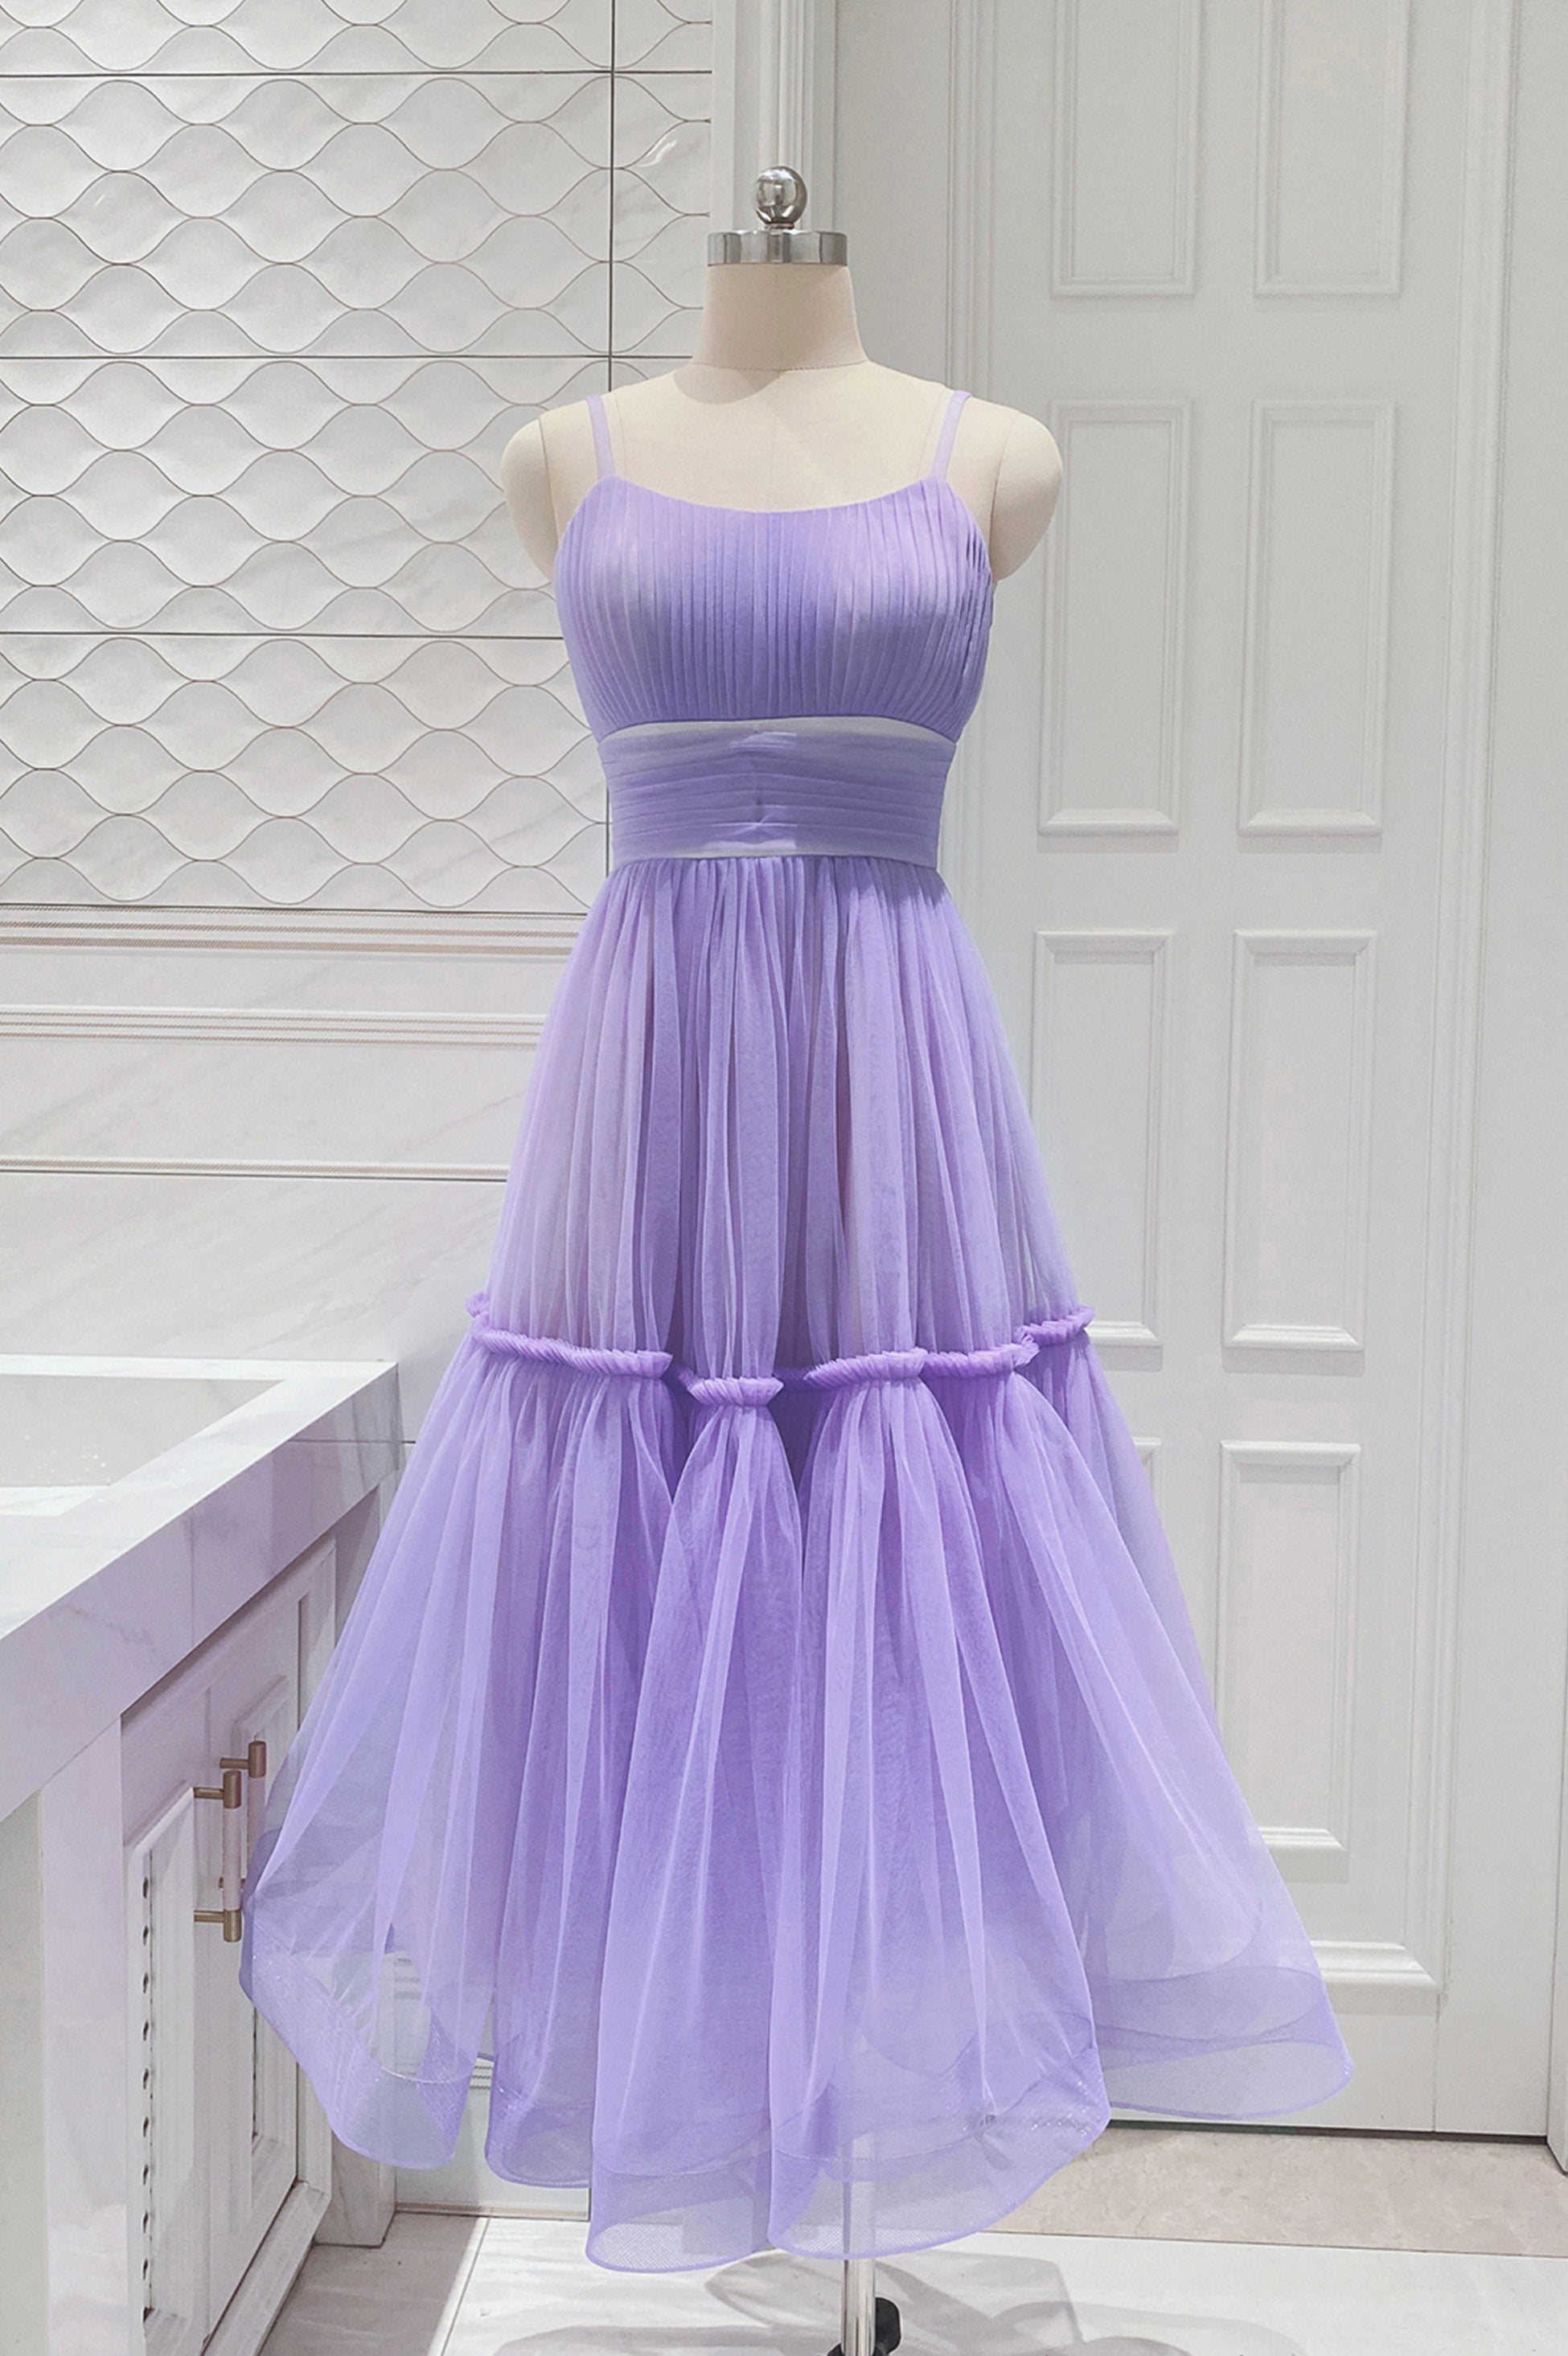 Cute Tulle Scoop Spaghetti Straps Homecoming Dress Outfits For Girls, Short Prom Dress